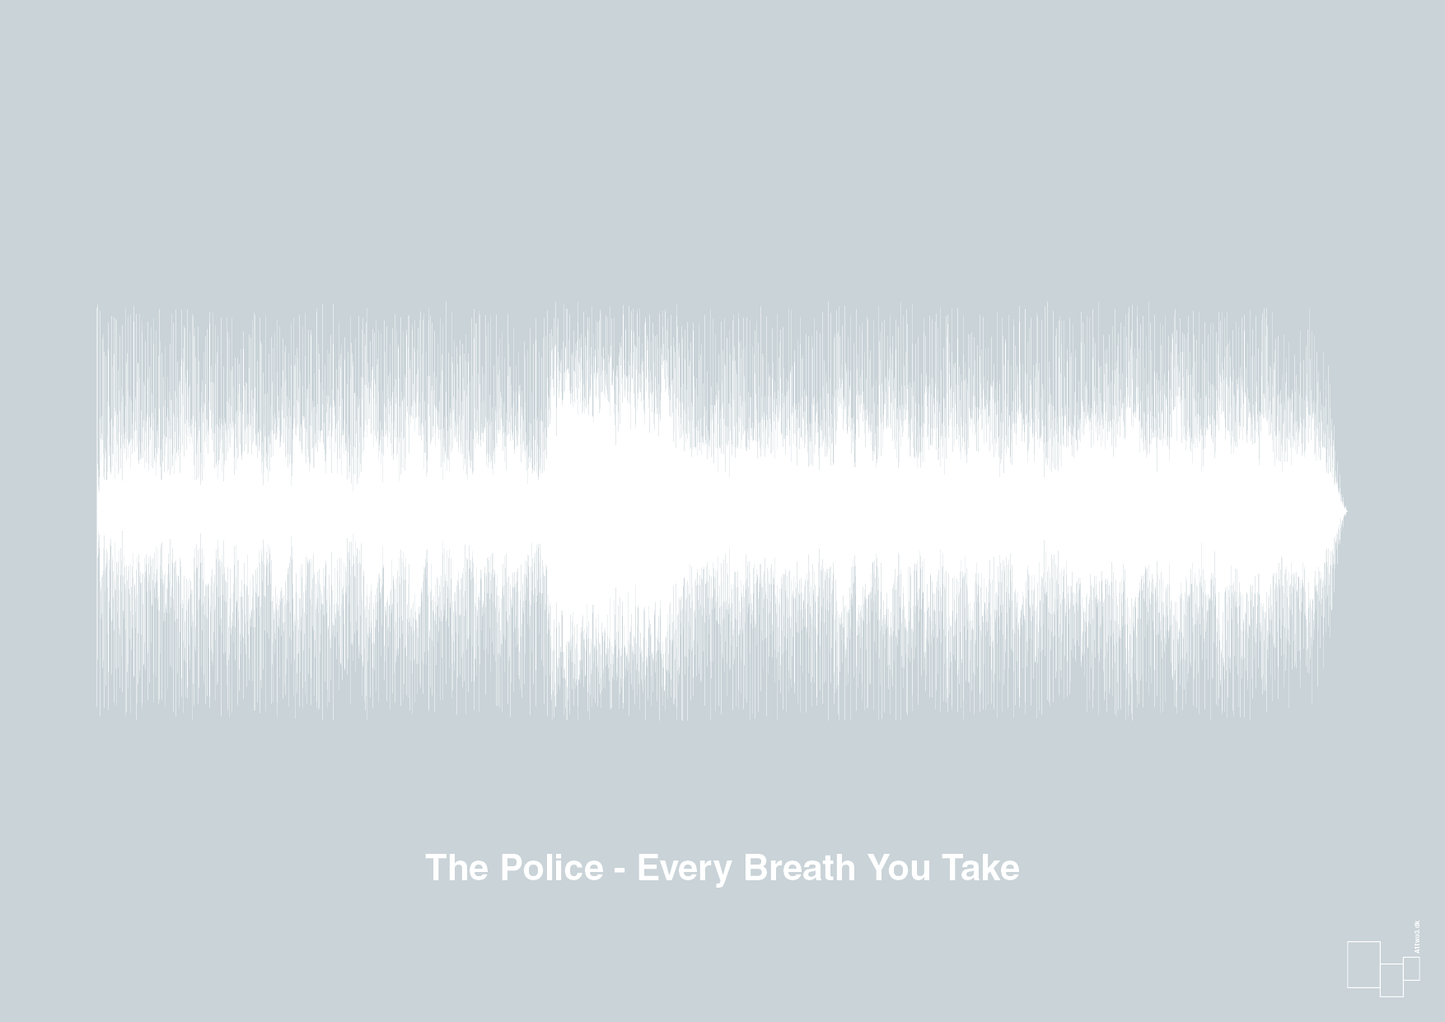 the police - every breath you take - Plakat med Musik i Light Drizzle